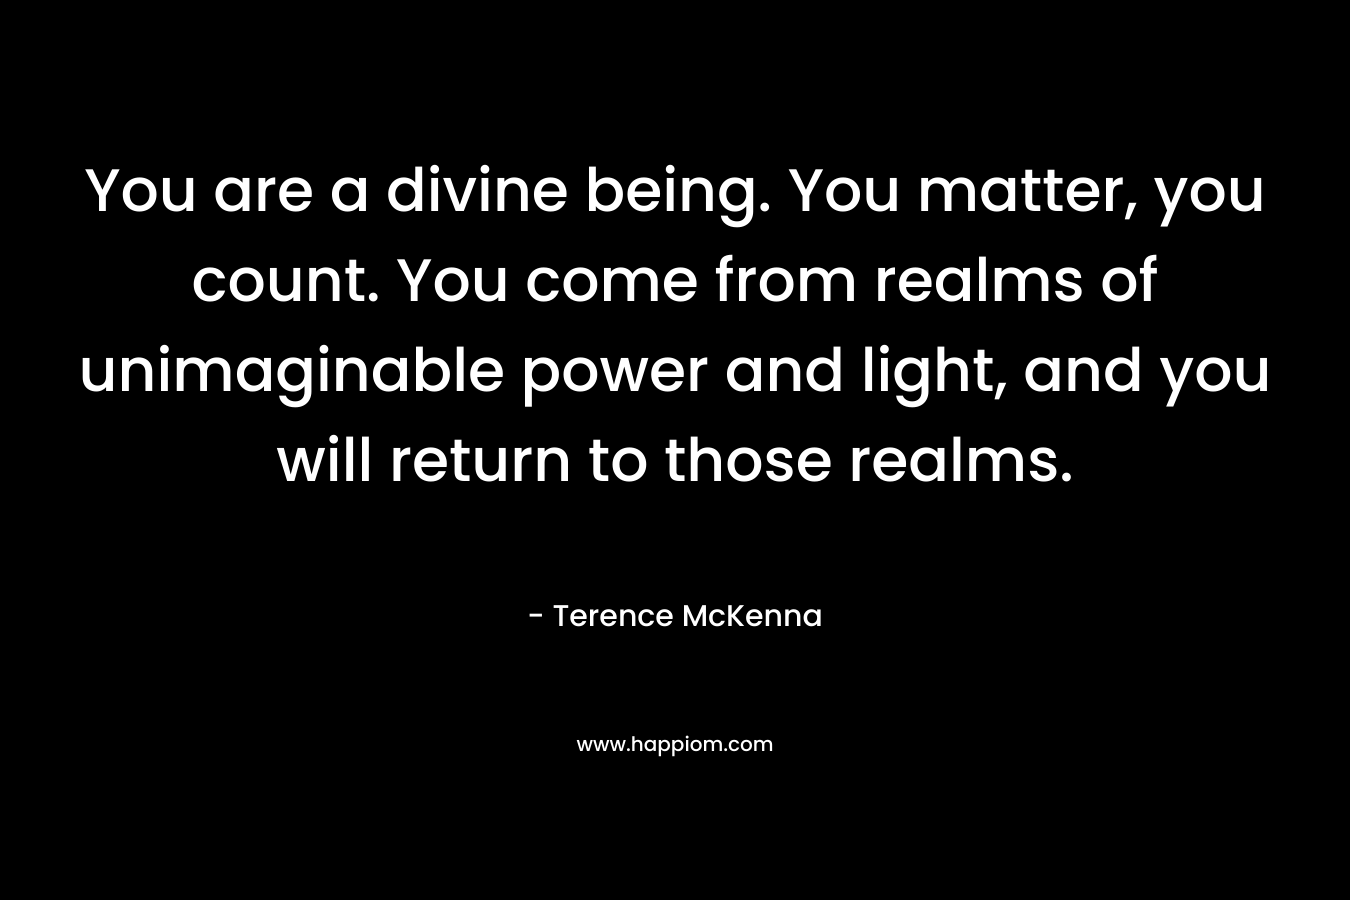 You are a divine being. You matter, you count. You come from realms of unimaginable power and light, and you will return to those realms.